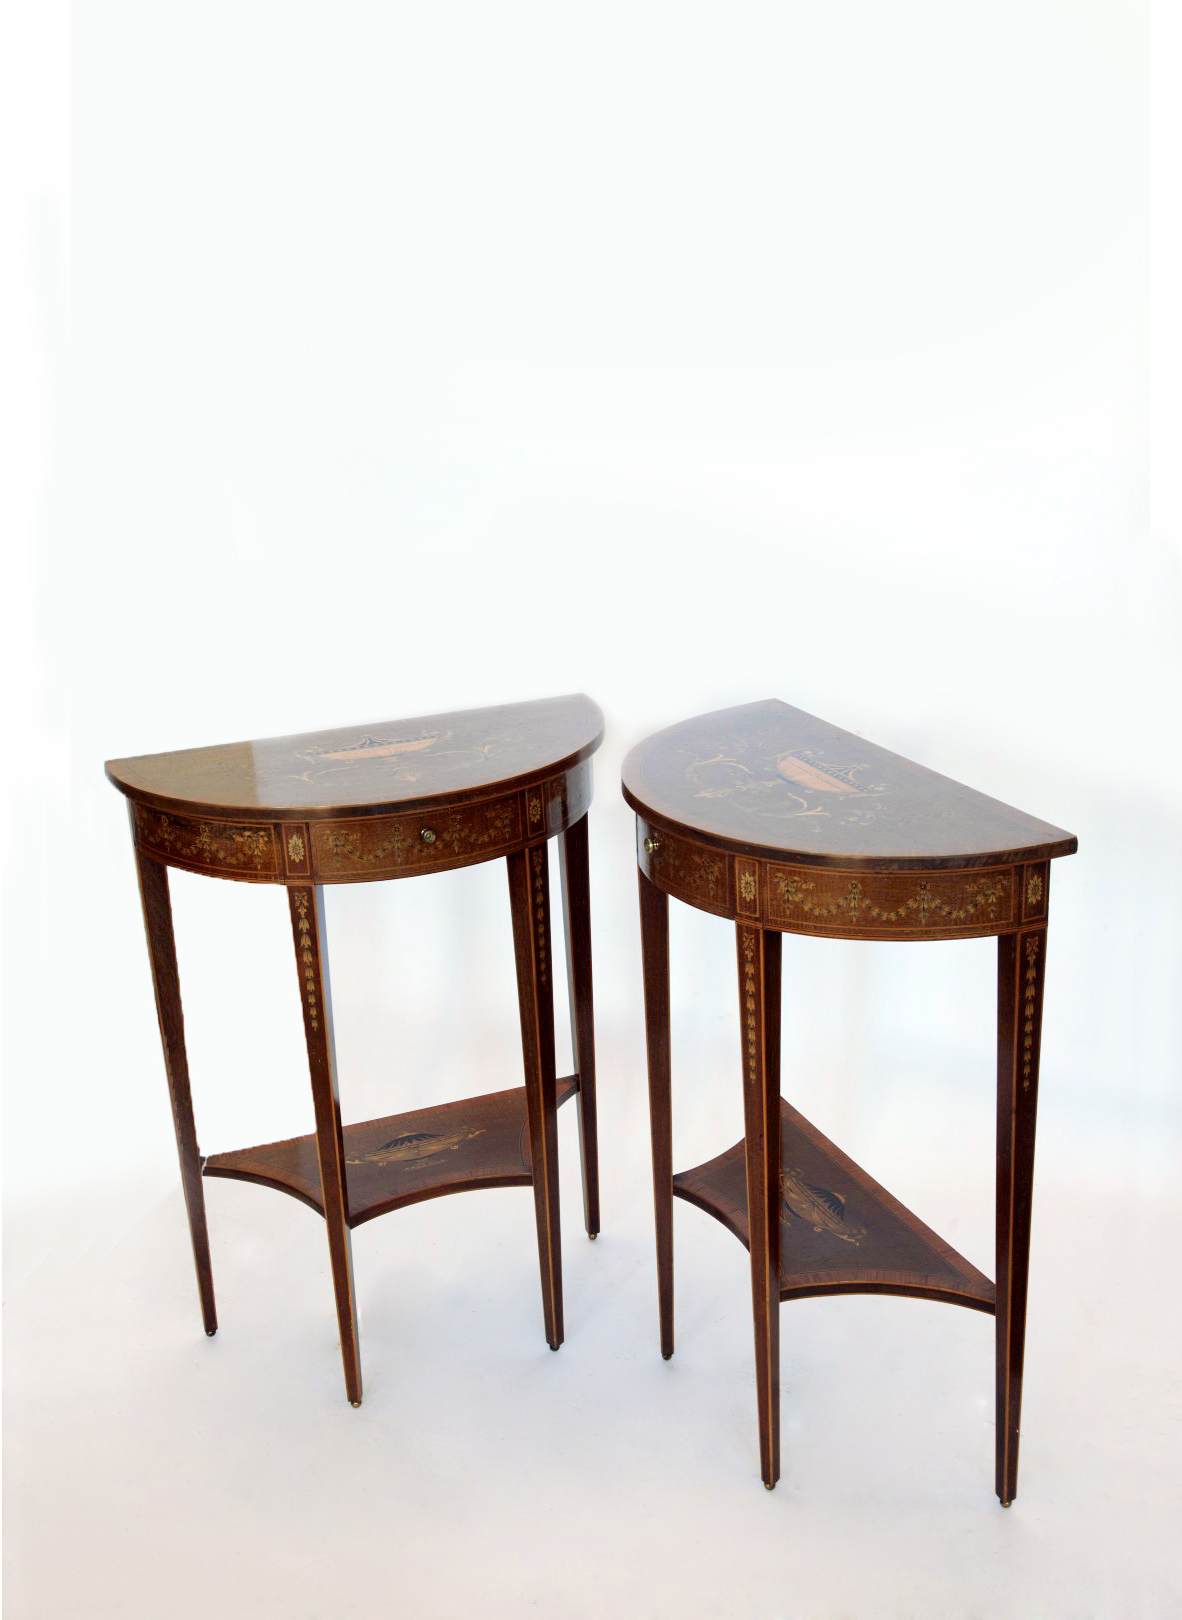 A pair of Edwardian demi-lune hall tables, the tops inlaid with a twin handled vase surrounded by